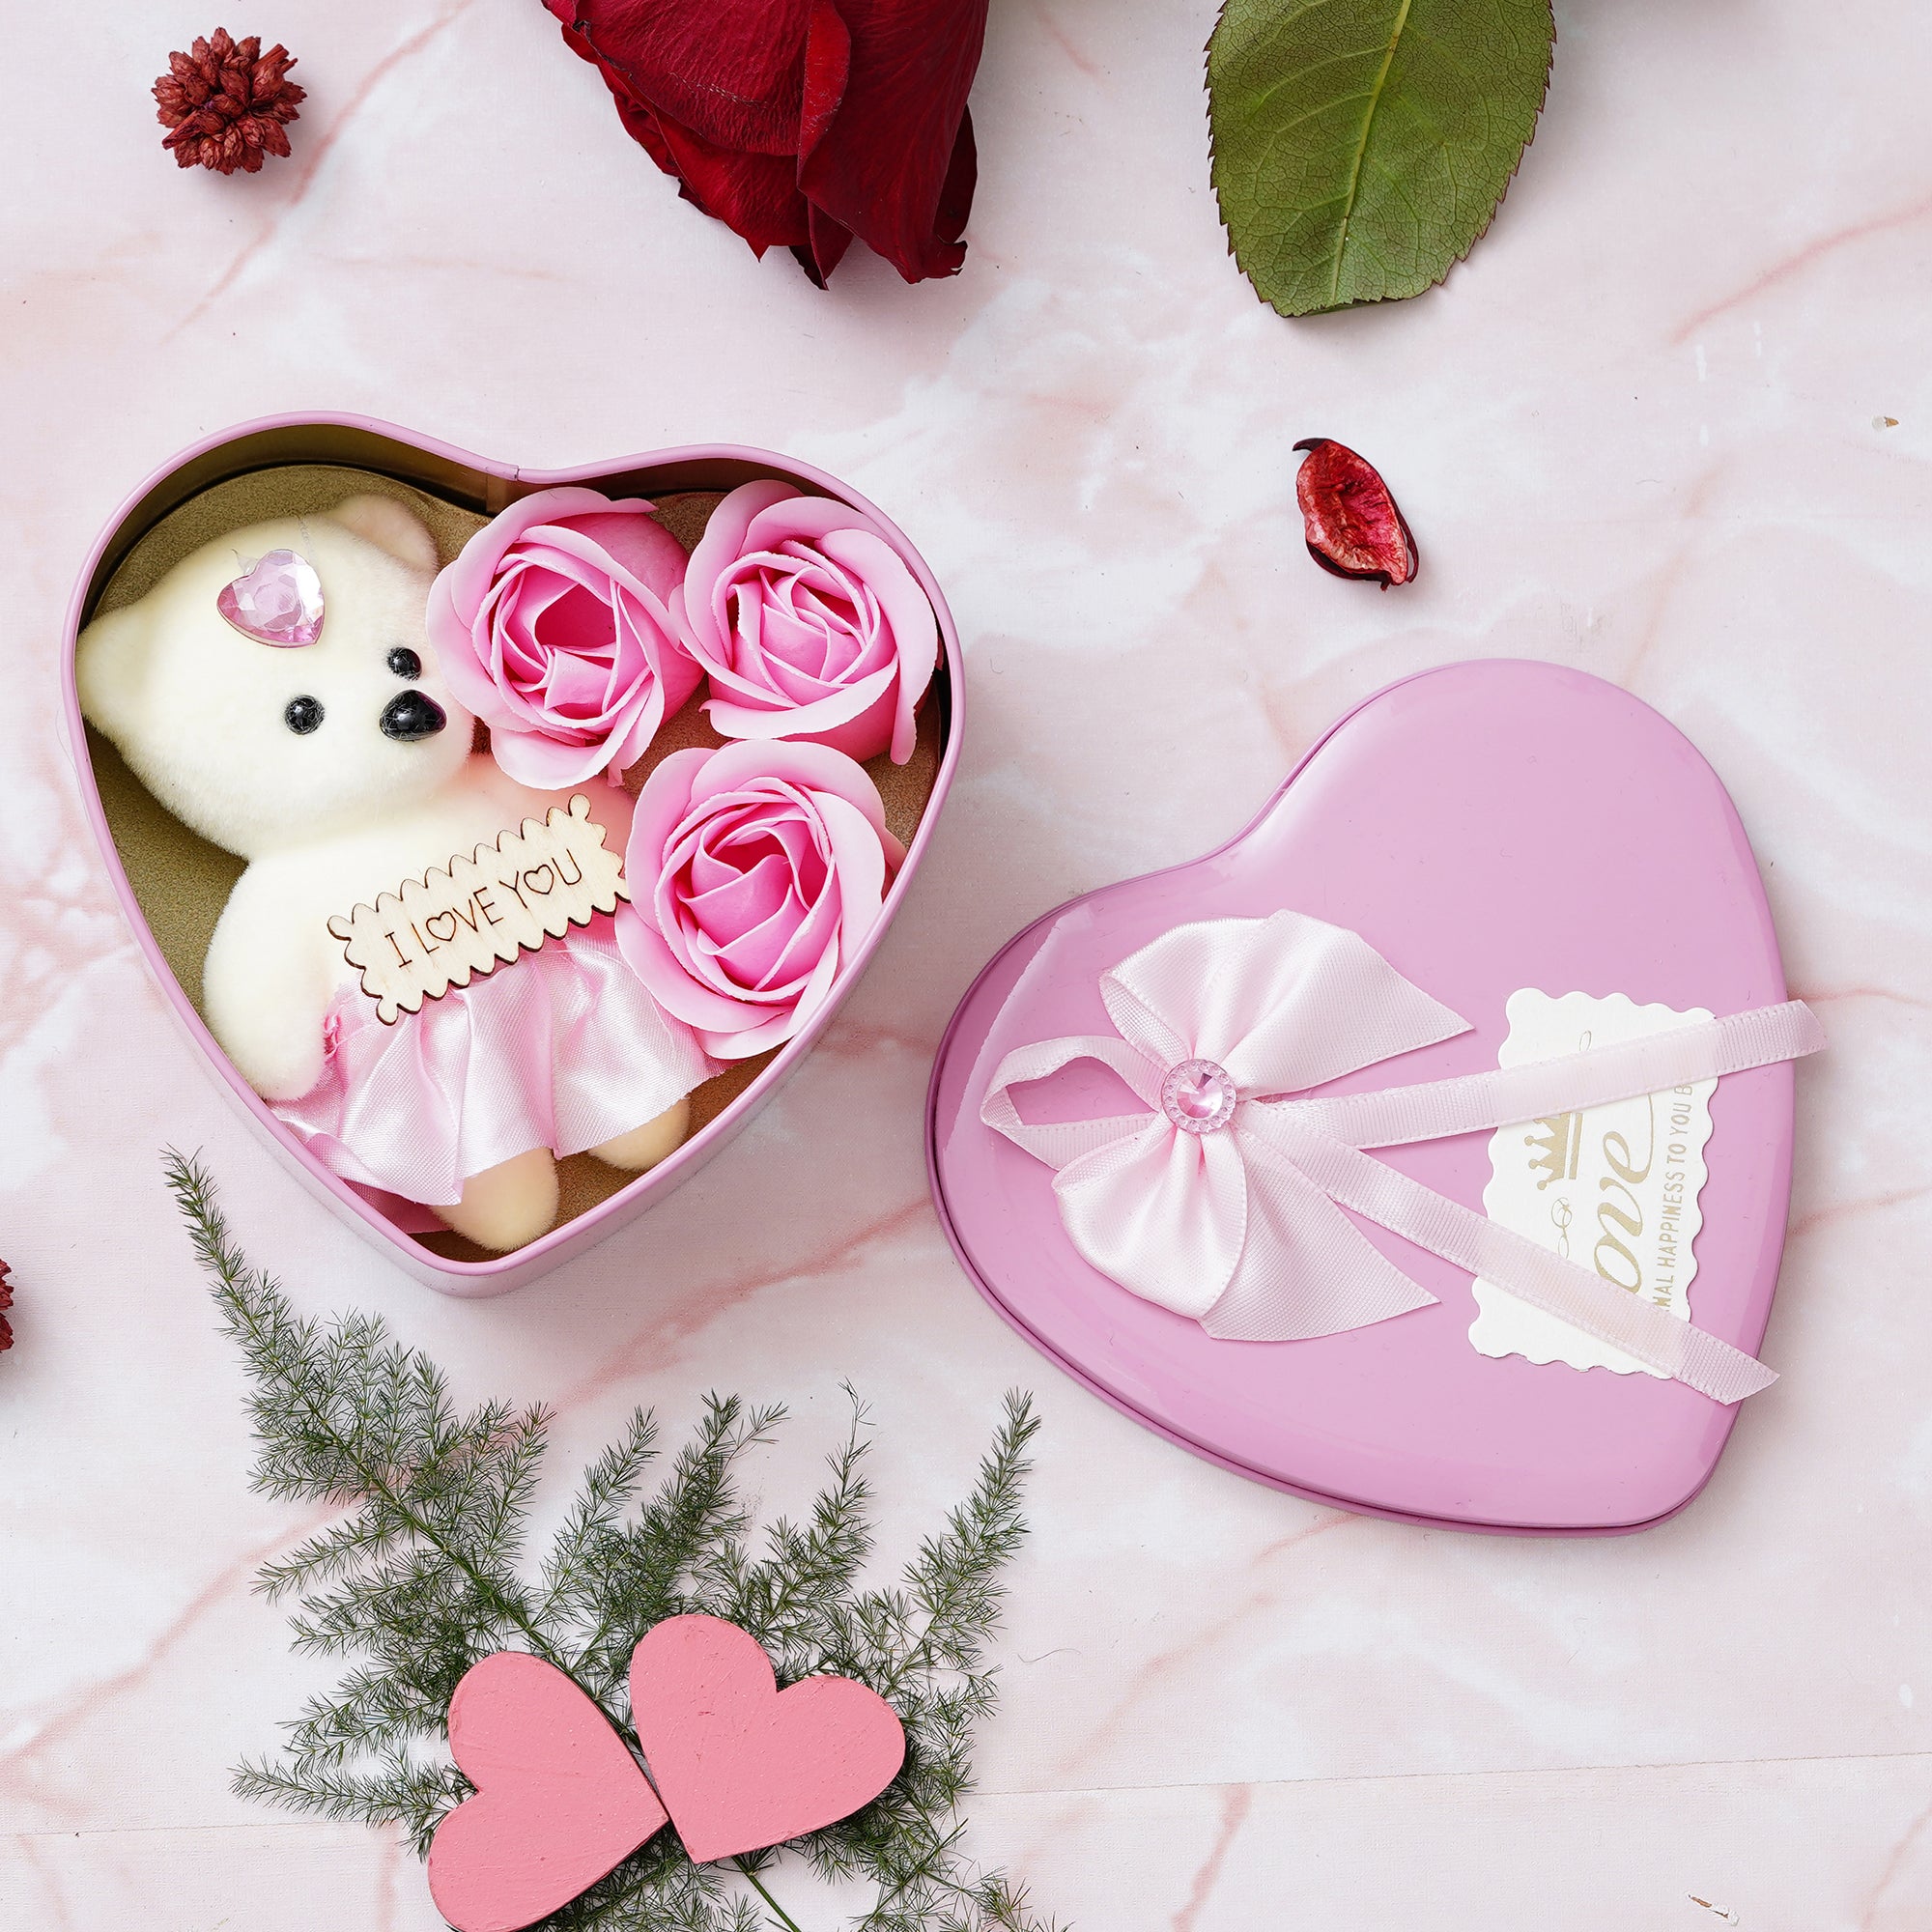 Valentine Combo of Pack of 8 Love Gift Cards, "My Heart Beats Only For You" Wooden Showpiece With Stand, Pink Heart Shaped Gift Box with Teddy and Roses 5